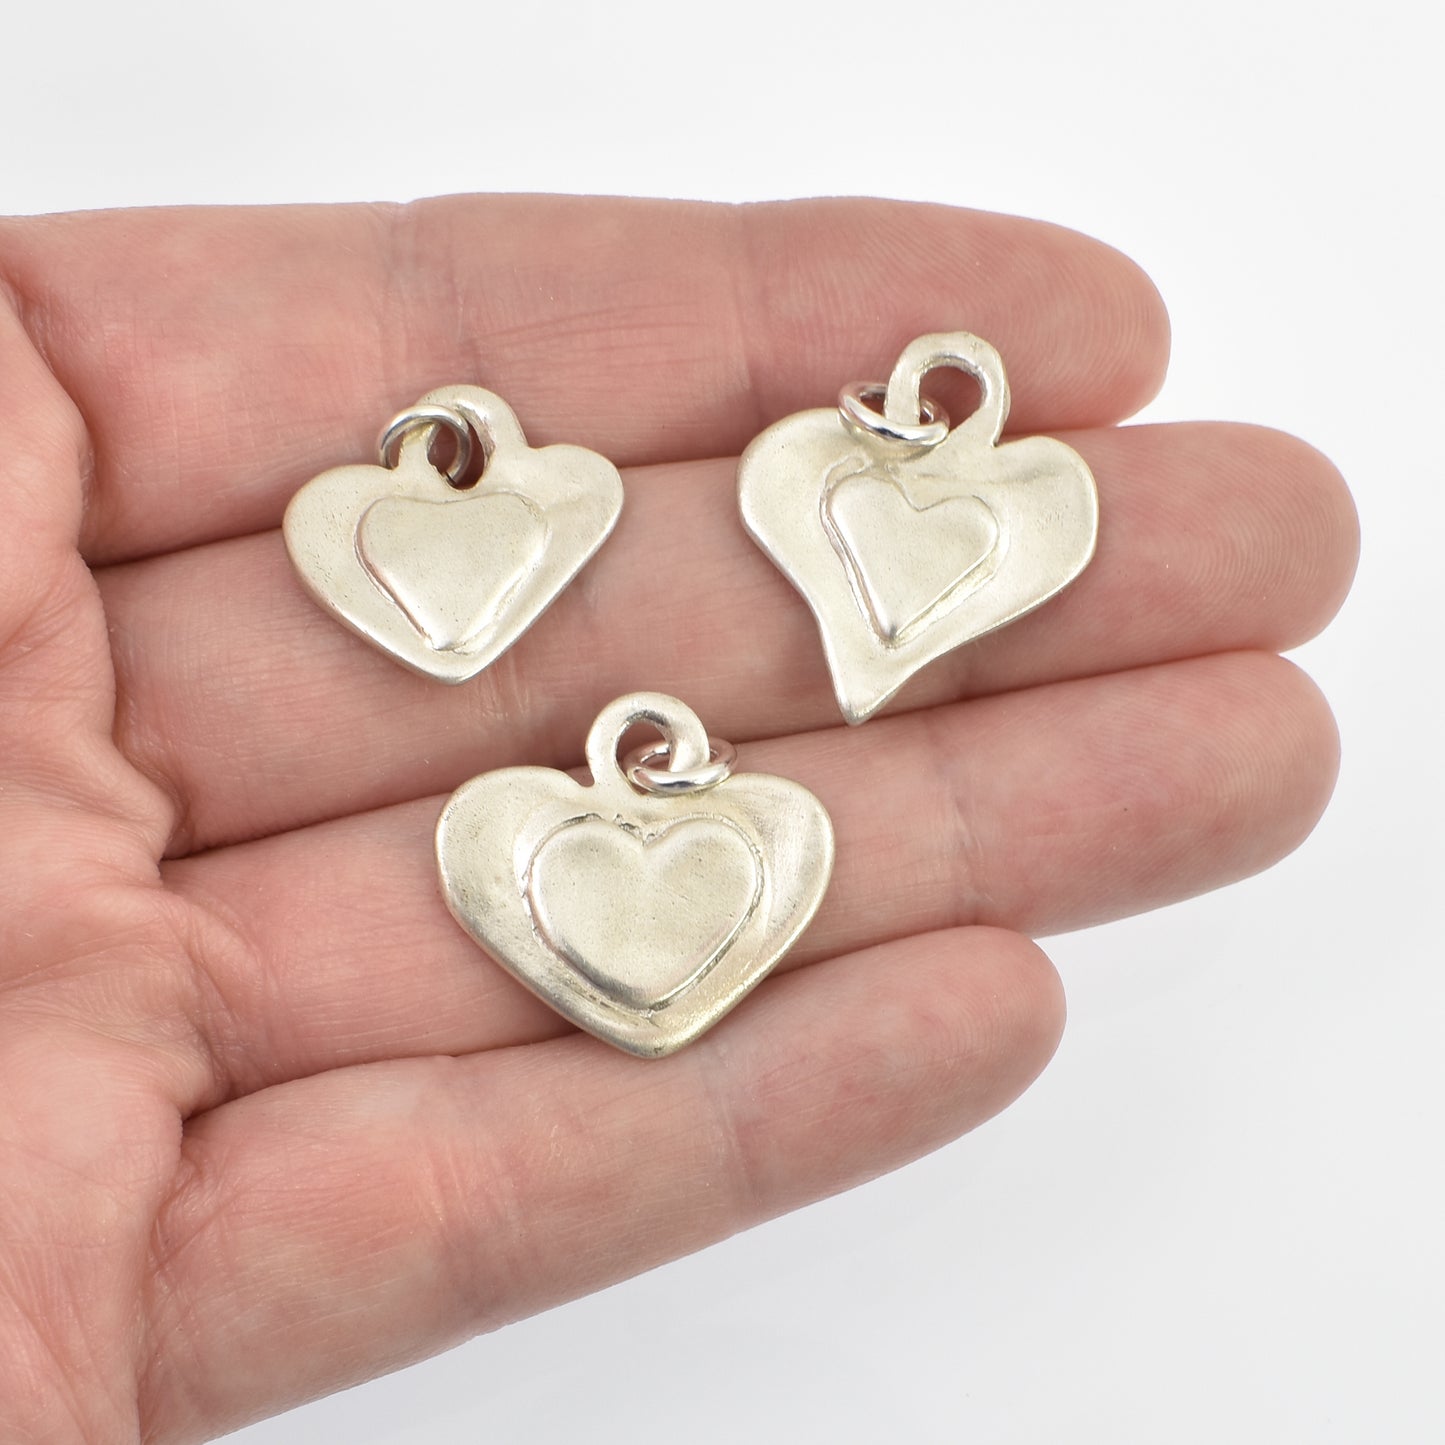 Sterling Silver Heart on Heart Charms All 3 Designs shown on hand for size reference